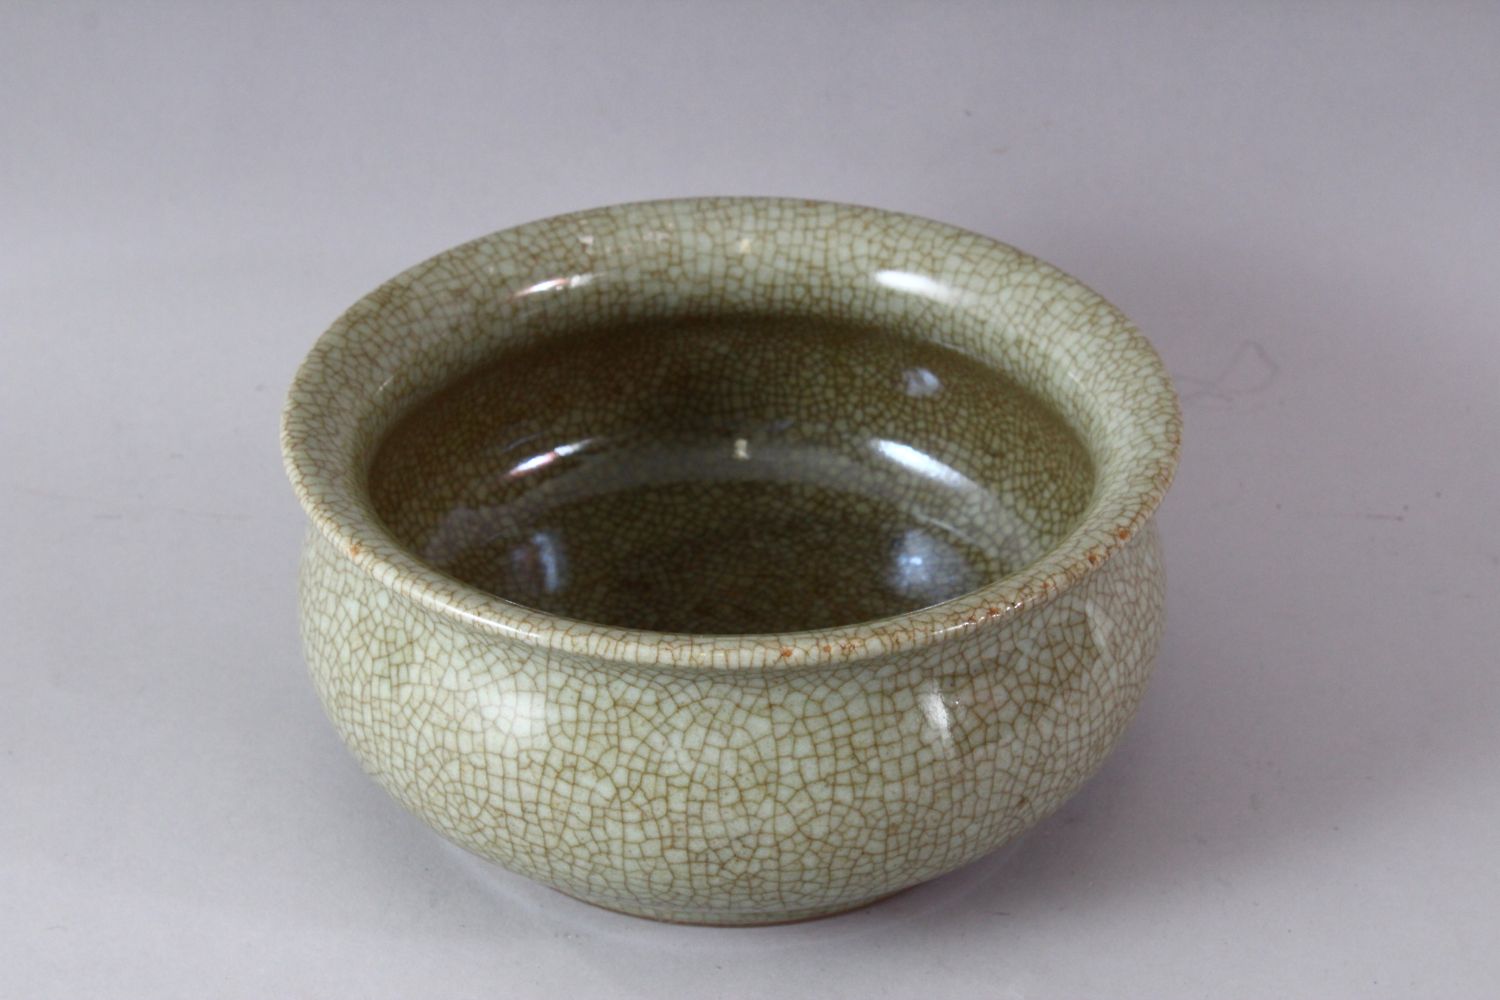 A SONG STYLE 'GE WARE' CIRCULAR POTTERY INCENSE BURNER, with crackle glaze finish, 22cm diameter. - Image 3 of 6